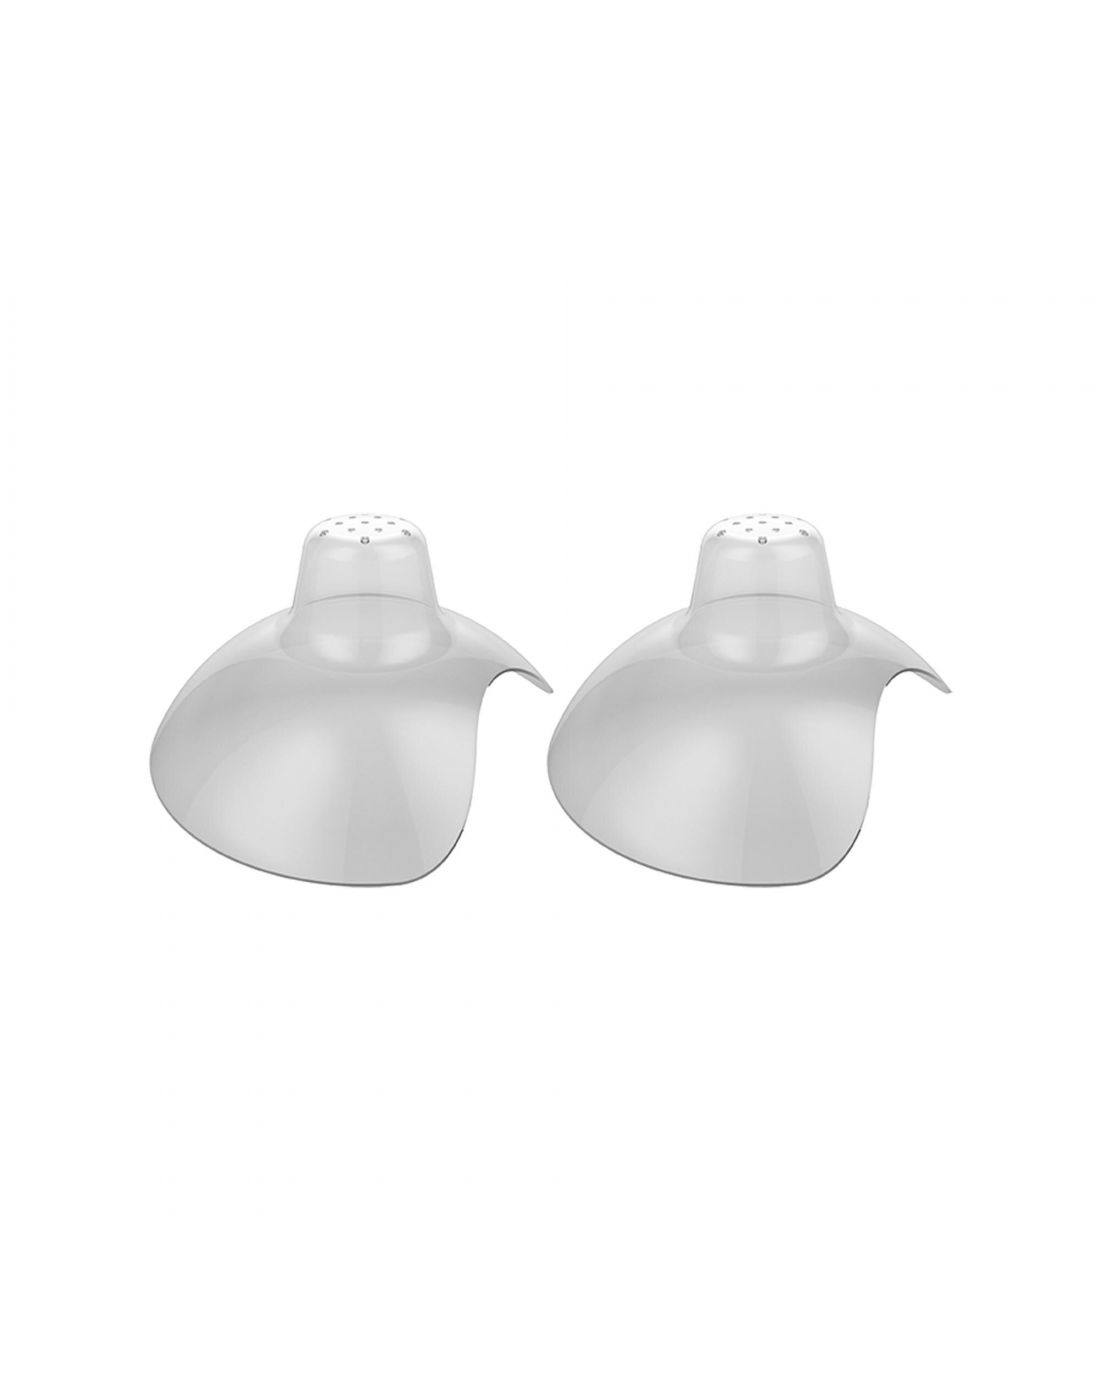 Dr.Brown's Nipple Shield, 2-Pack w/ Sterilizer Case, Size 1 (up to 24 mm)